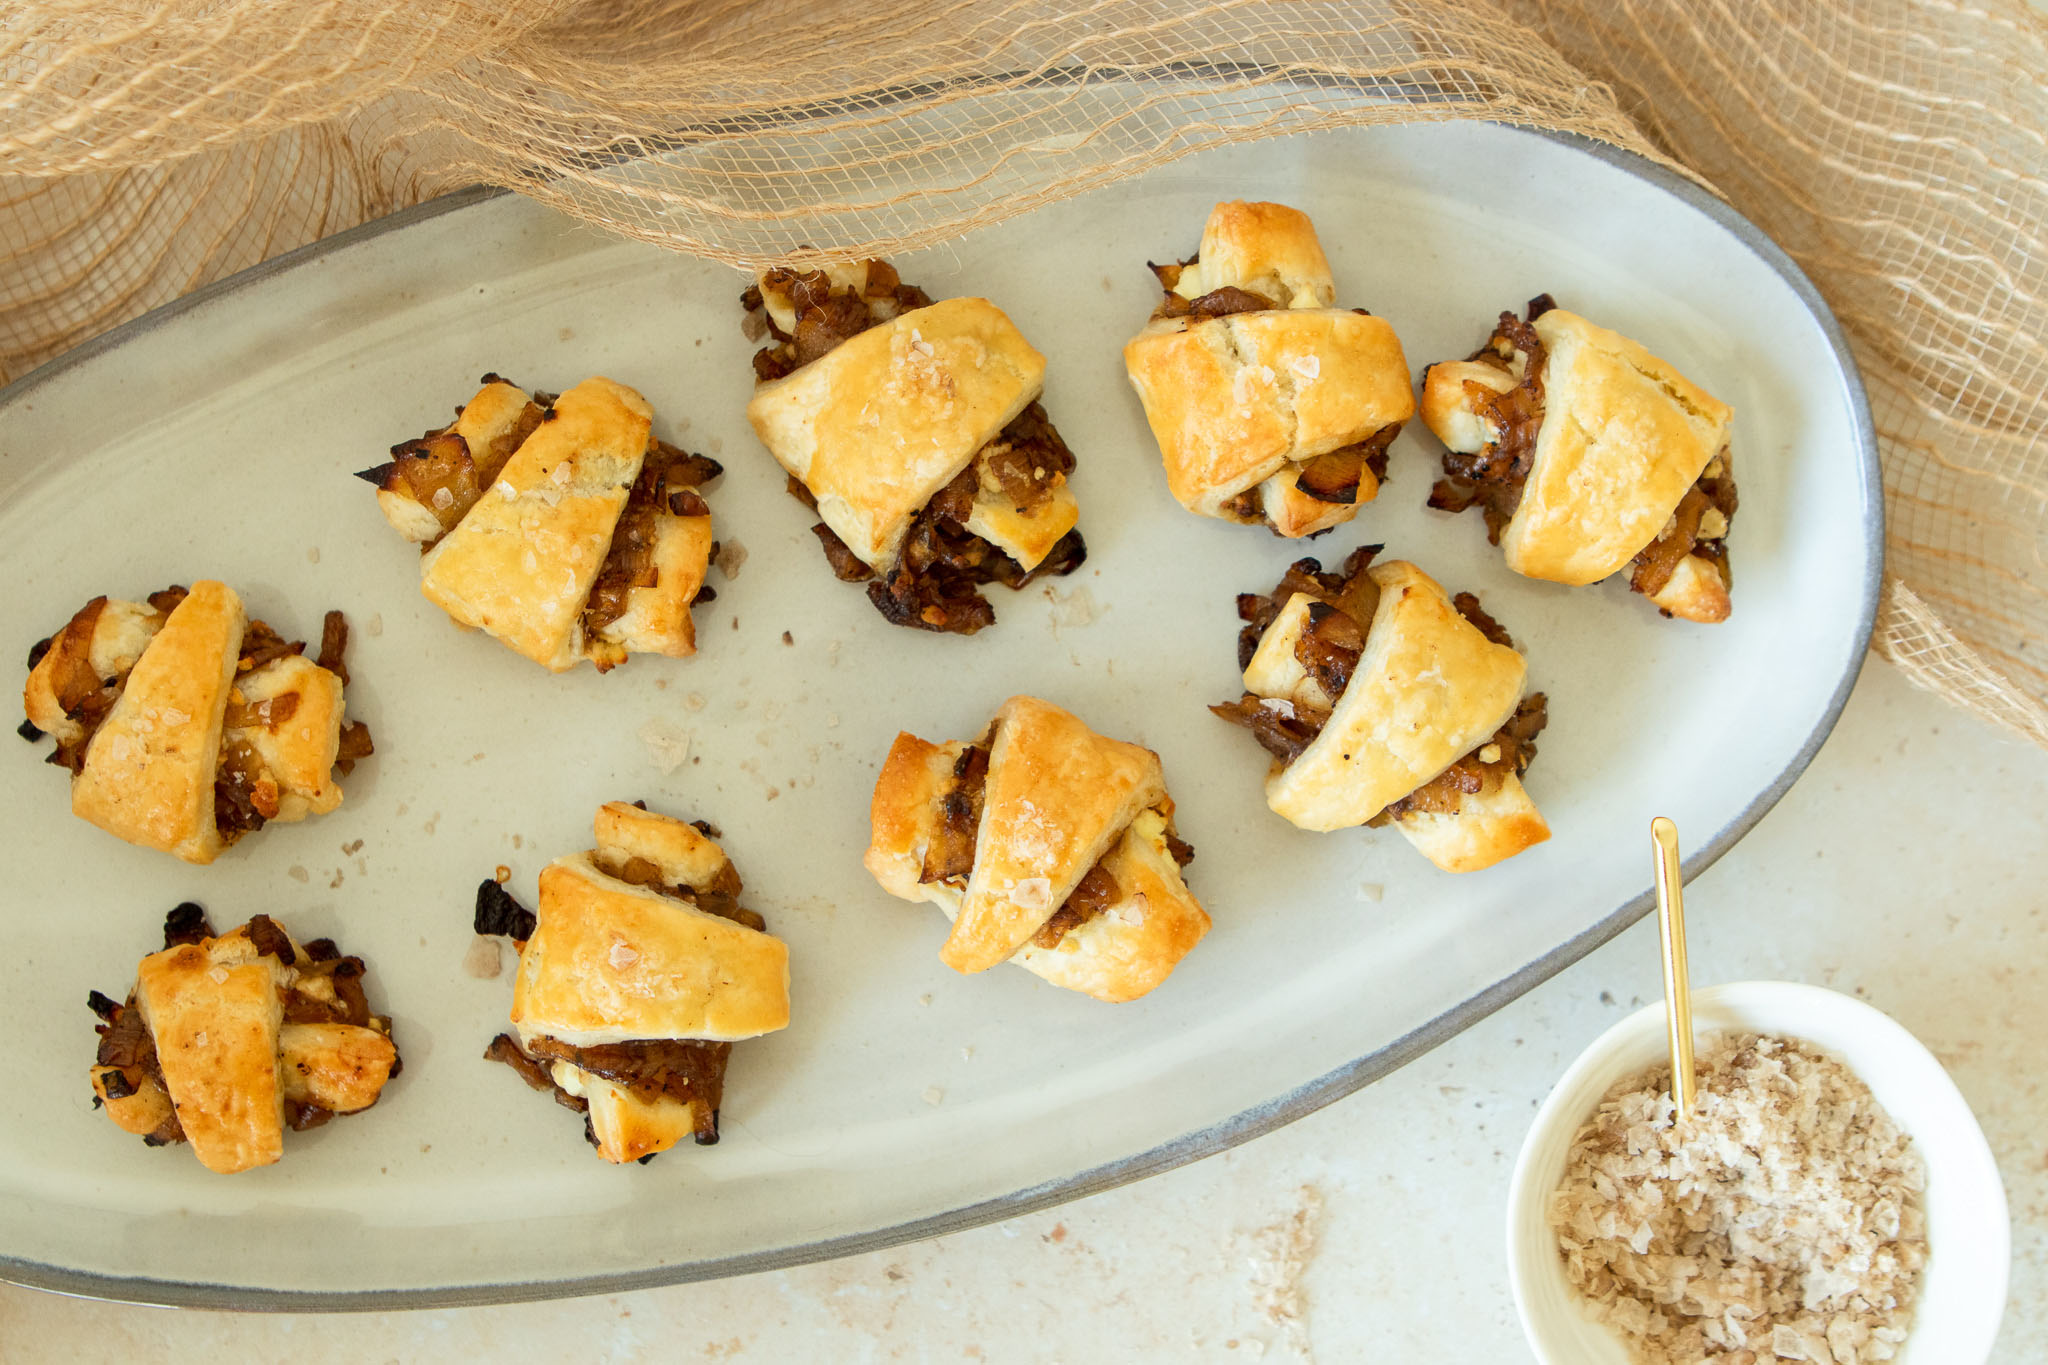 ONION JAM AND GOAT CHEESE RUGELACH